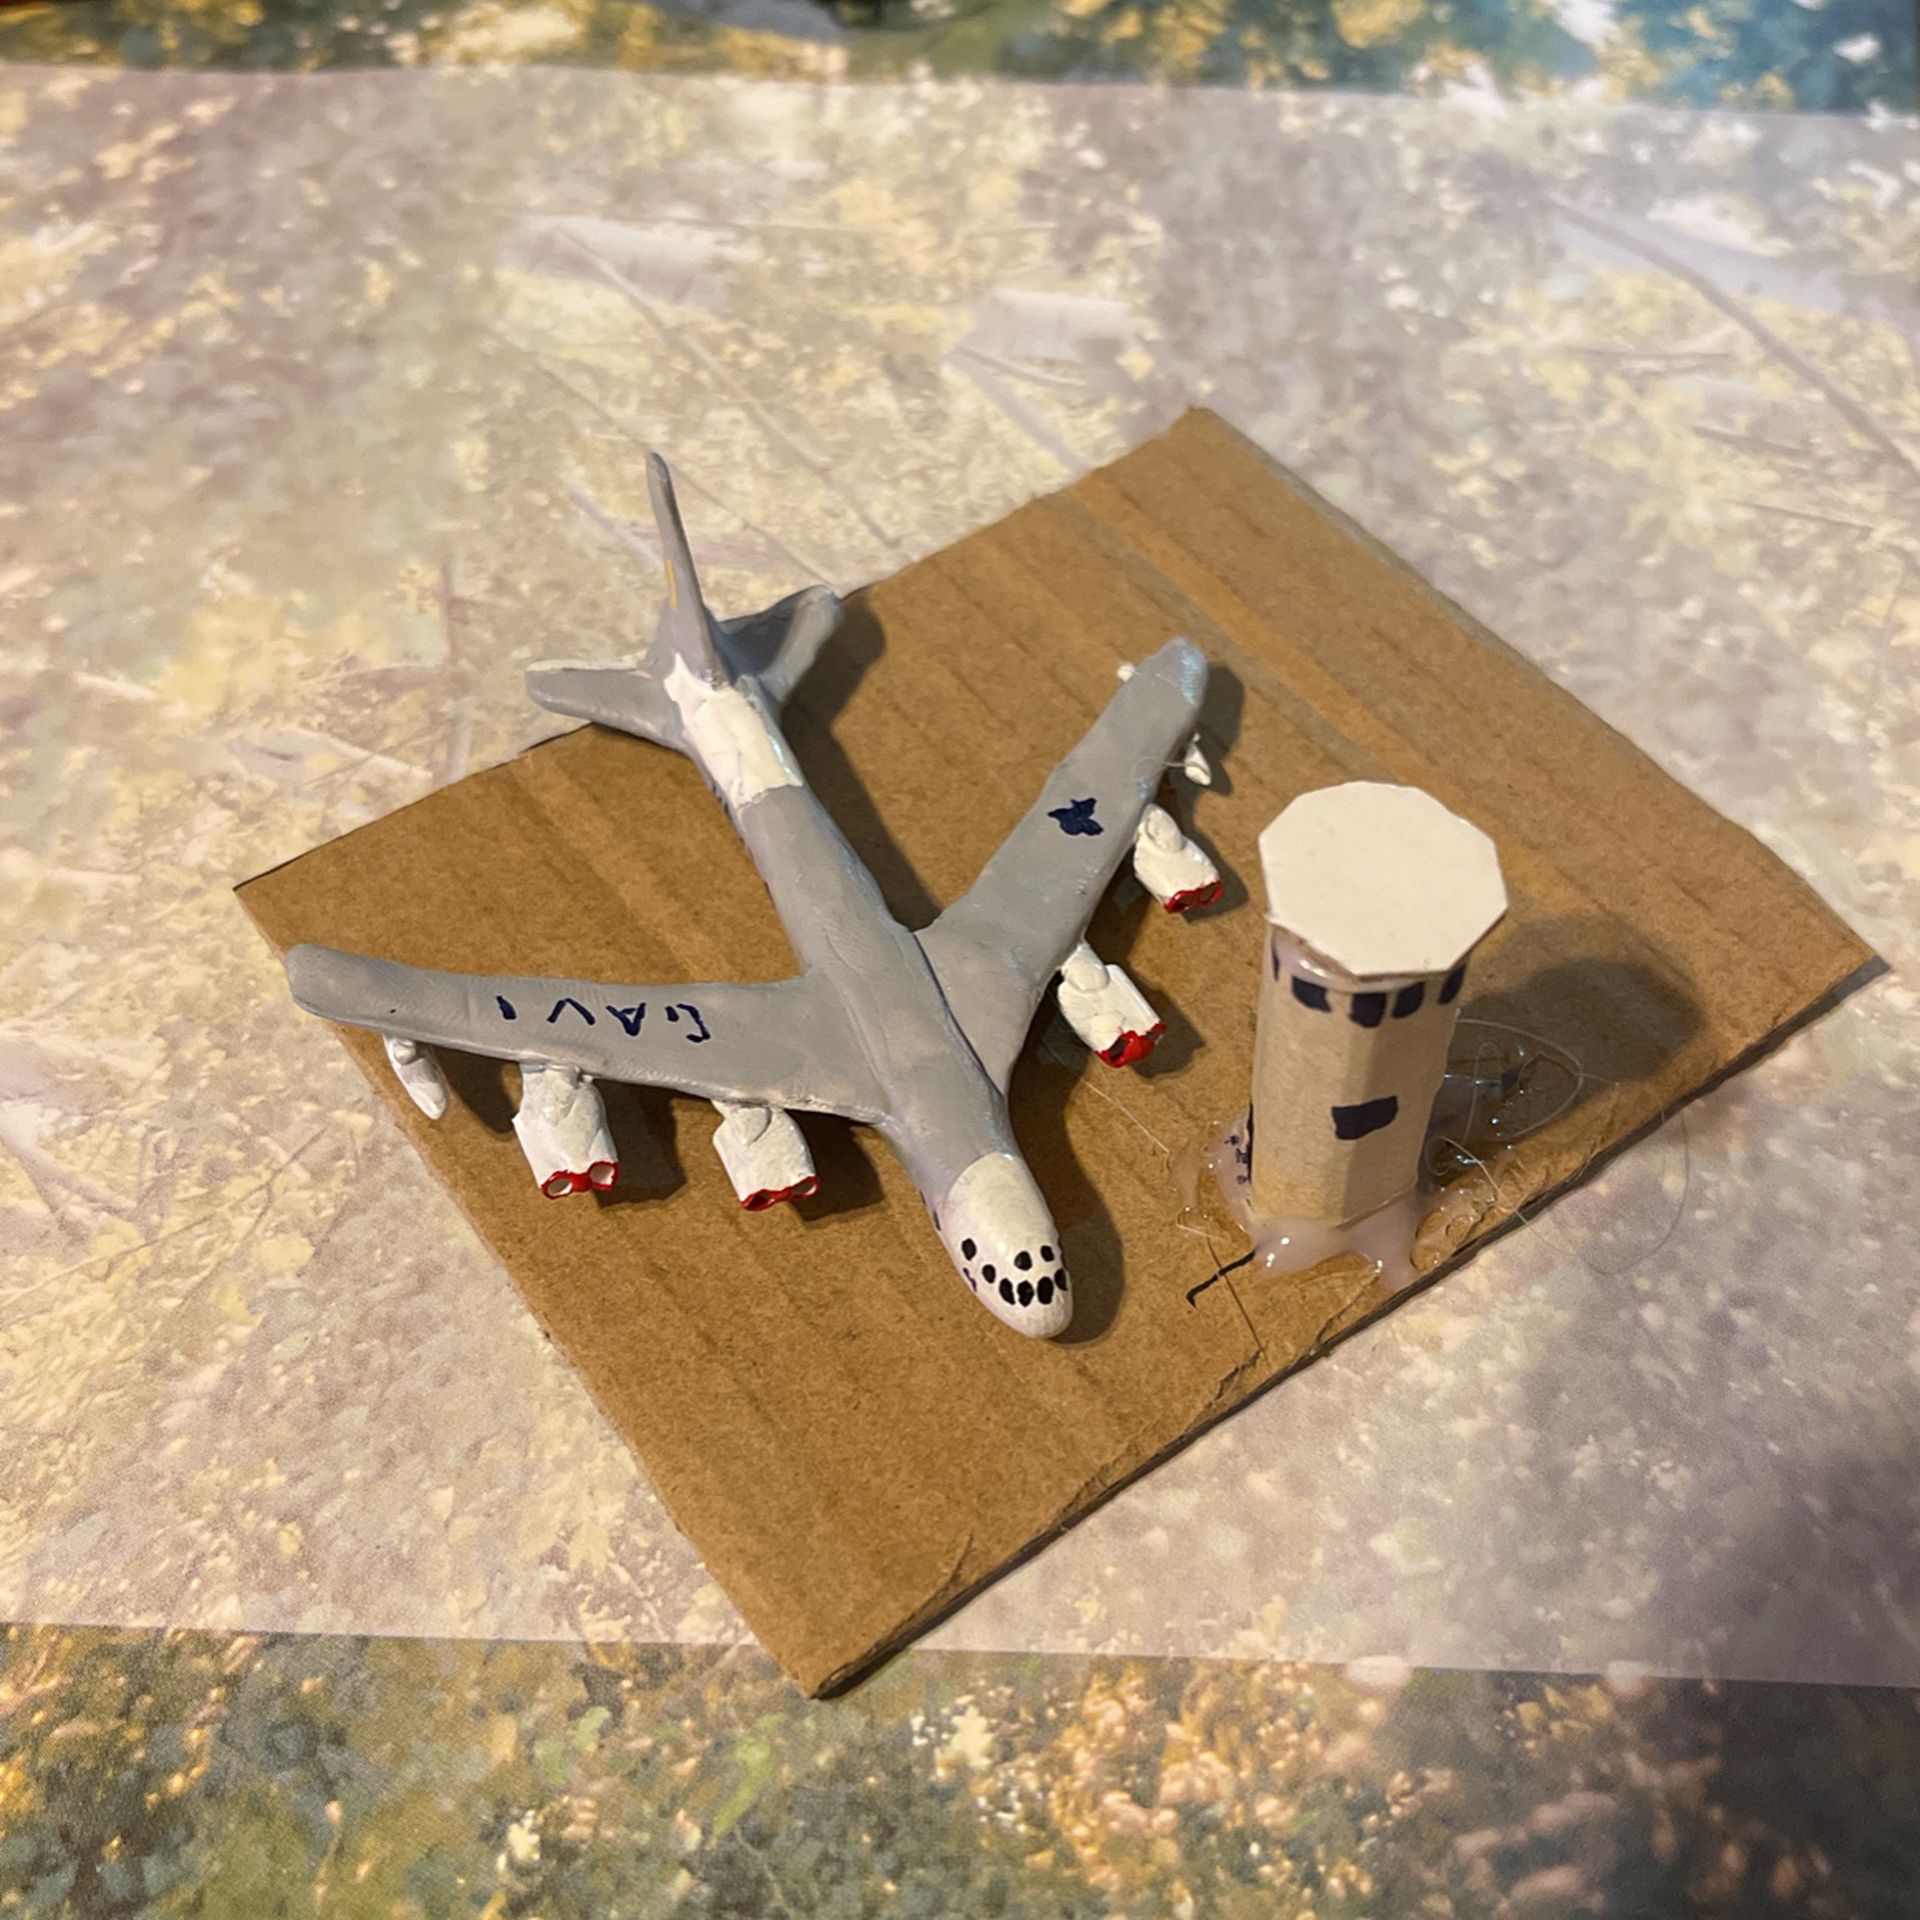 Tiny B-52 strategic bomber ornament 1:700 scale hand sculpted polymer enamel painted